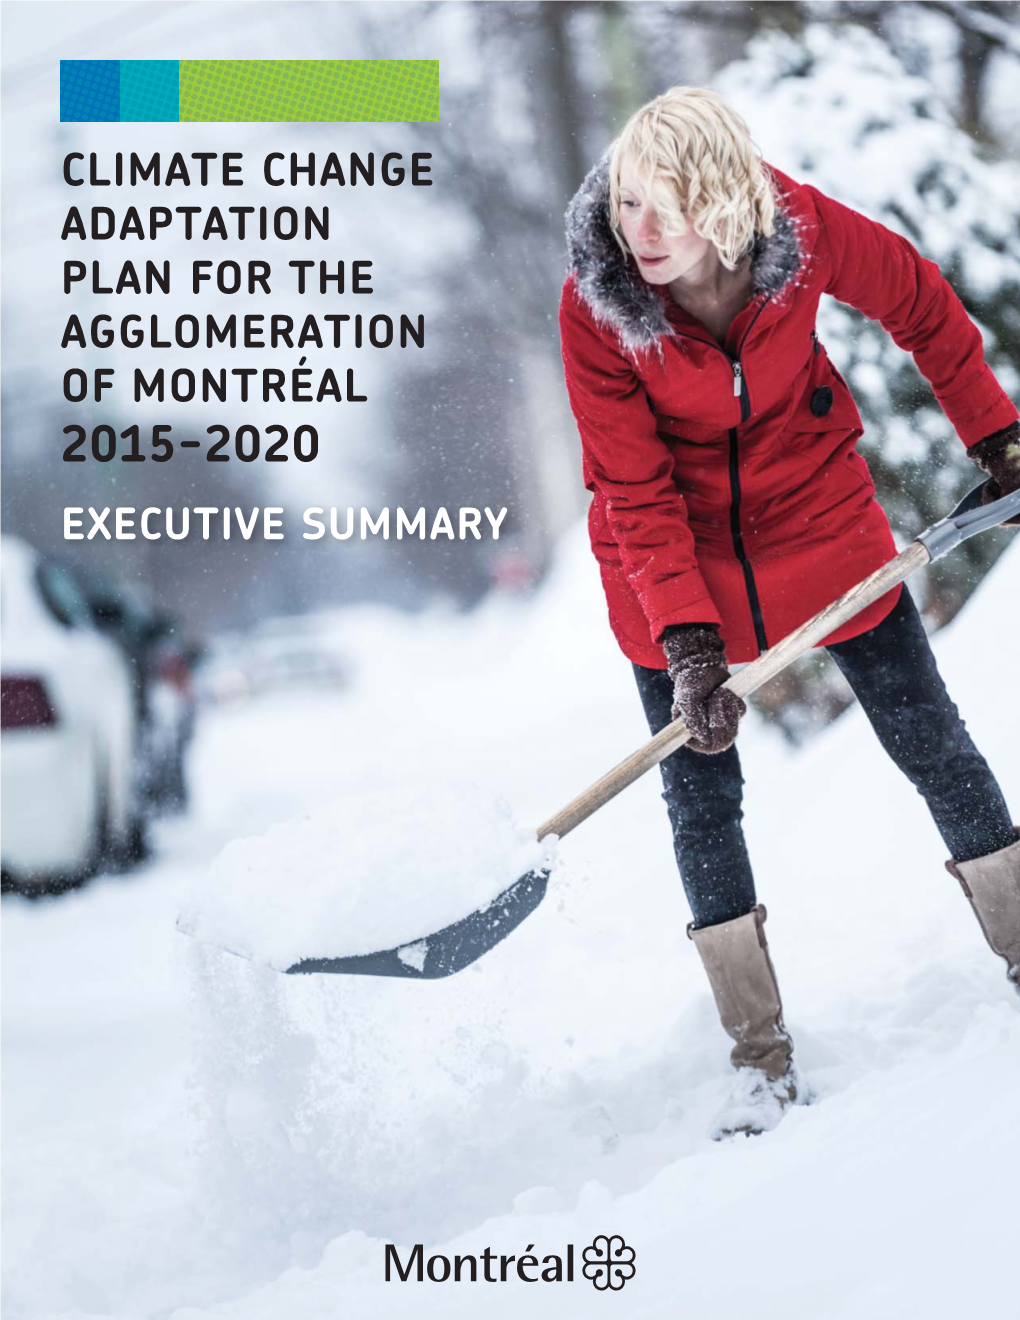 Climate Change Adaptation Plan for the Agglomeration of Montréal 2015-2020